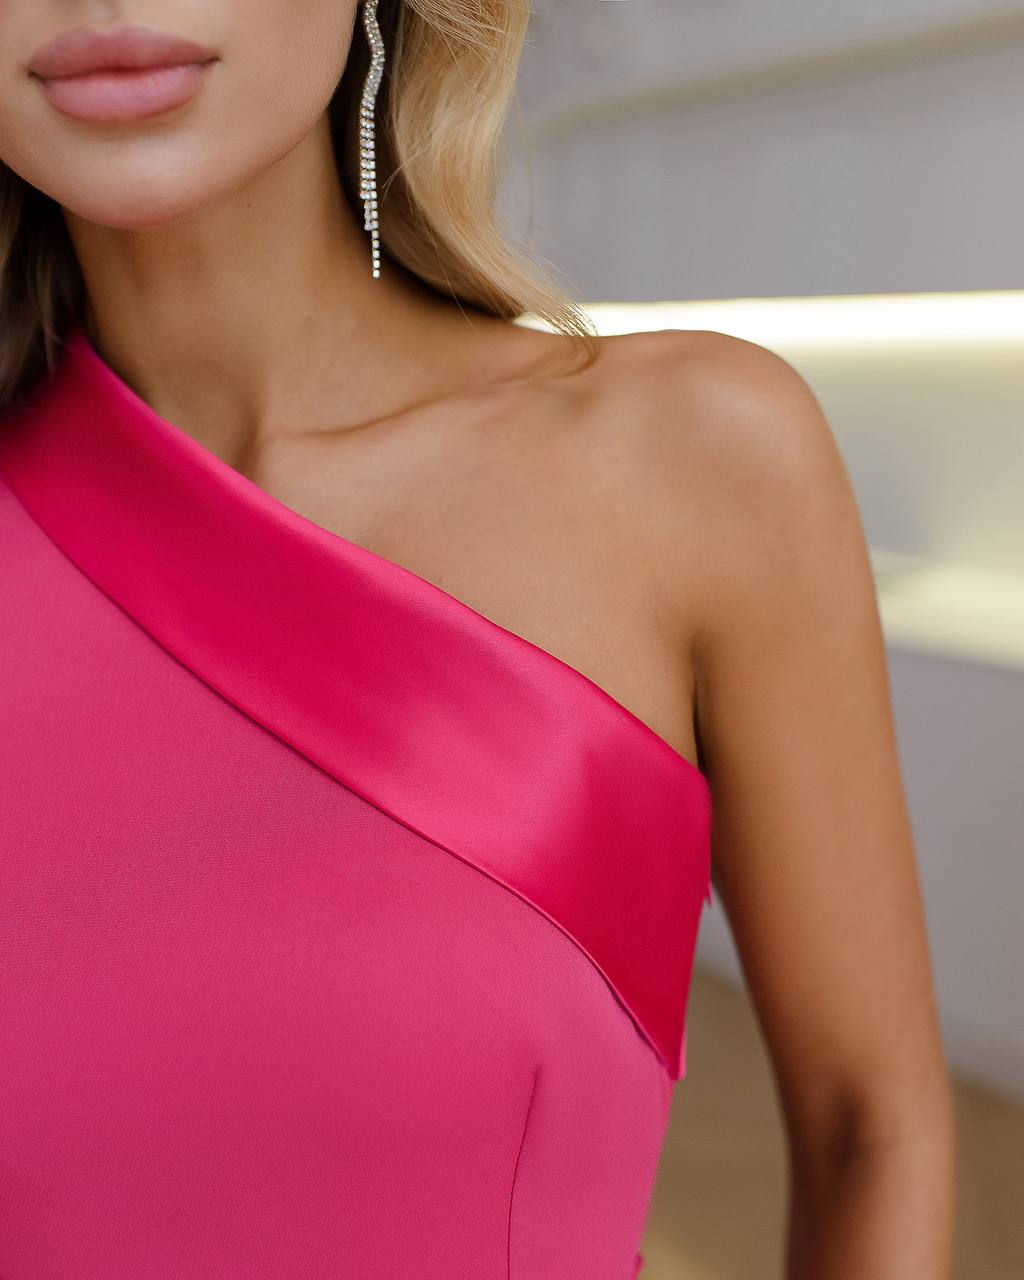 a woman wearing a pink dress and earrings